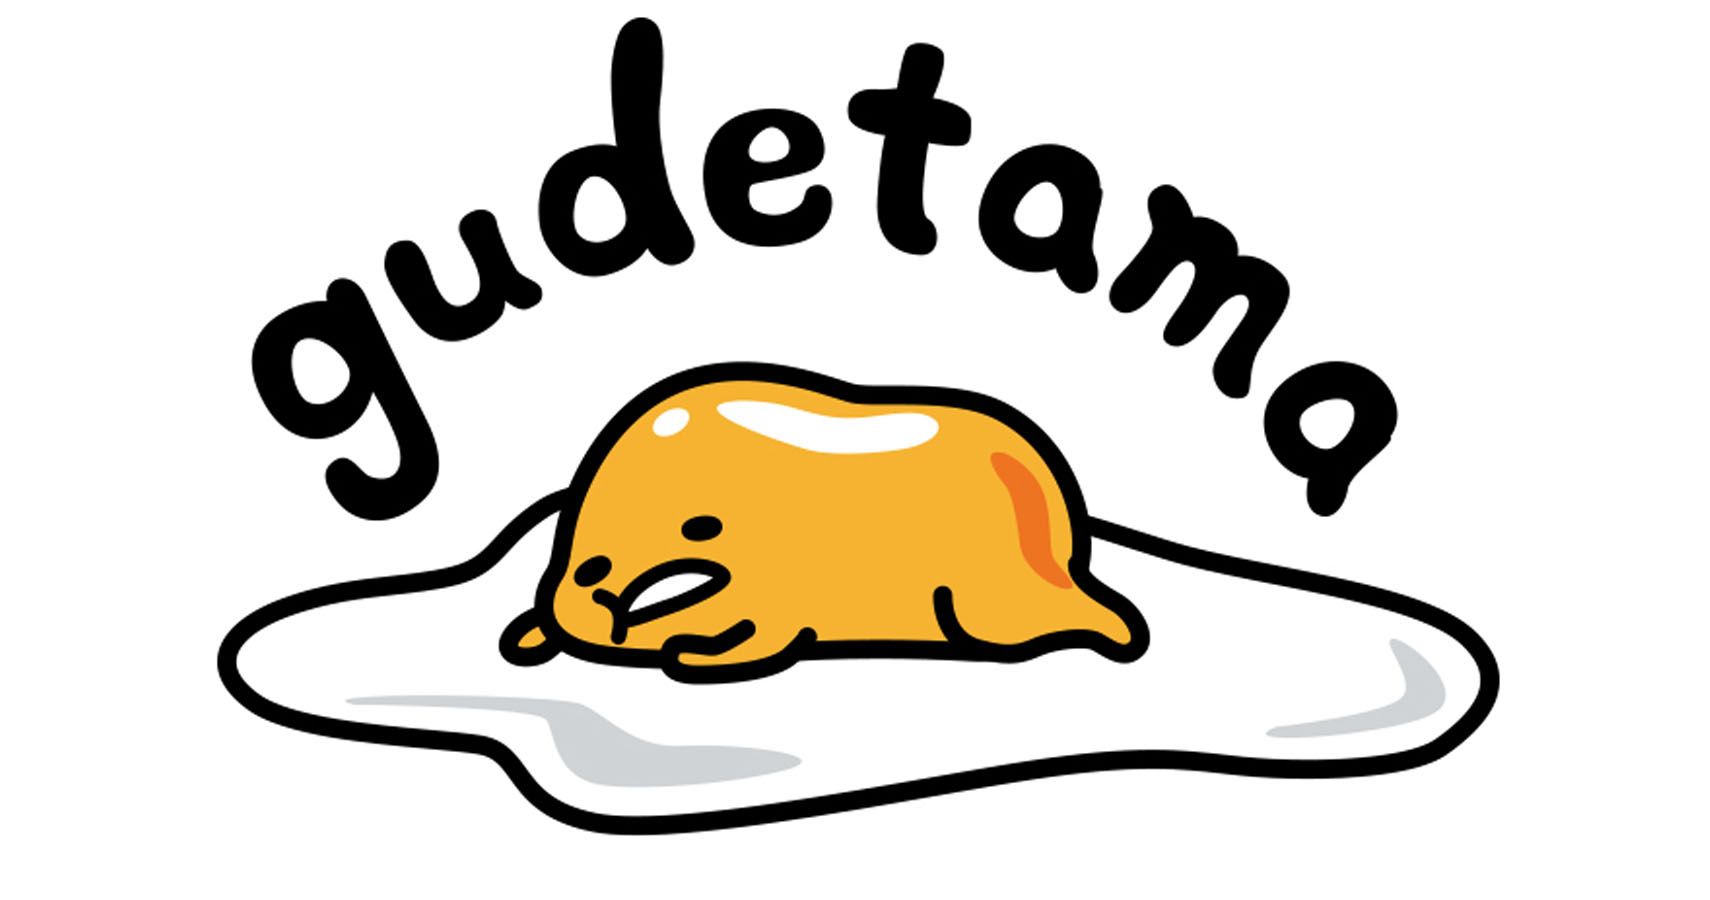 Gudetama The Lazy Egg Now Has Its Own App Thethings